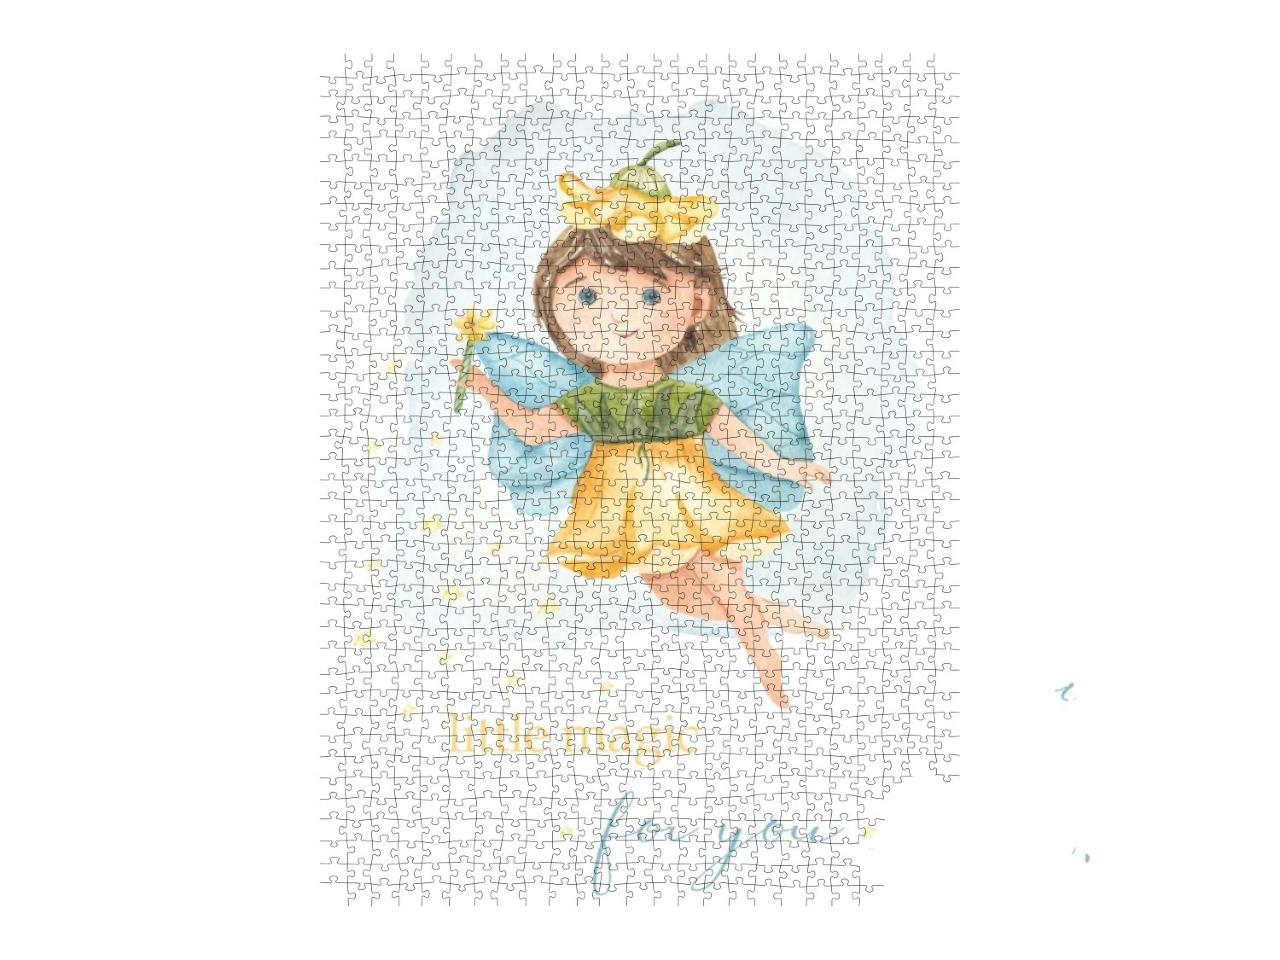 Little Garden Fairy with a Magic Wand Watercolor P... Jigsaw Puzzle with 1000 pieces